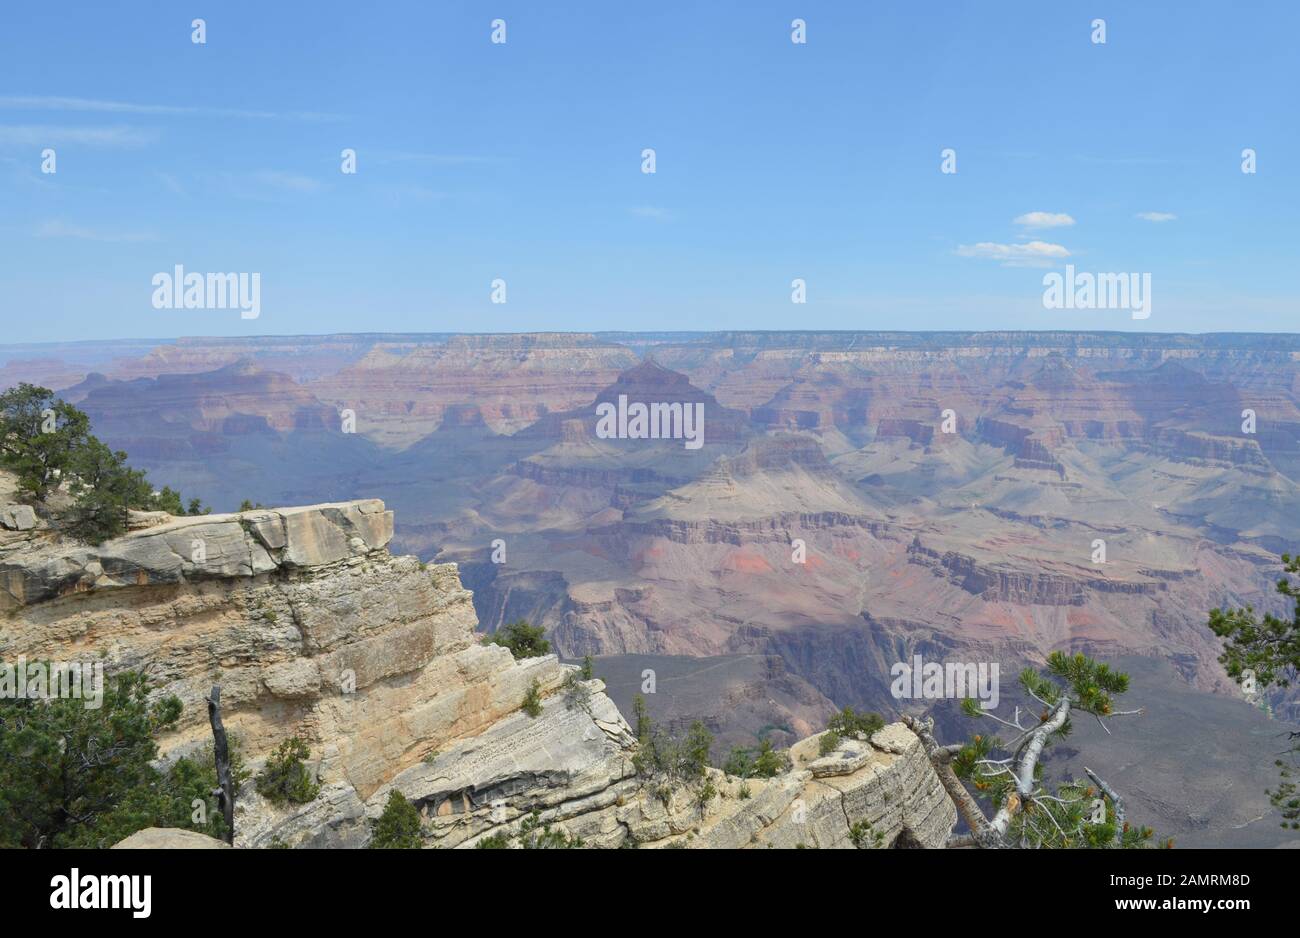 Summer In Arizona: Buddha Temple, Cheops Pyramid, Isis Temple and Shiva Temple Seen From Grand Canyon South Rim Between Mather Point and Yavapai Point Stock Photo